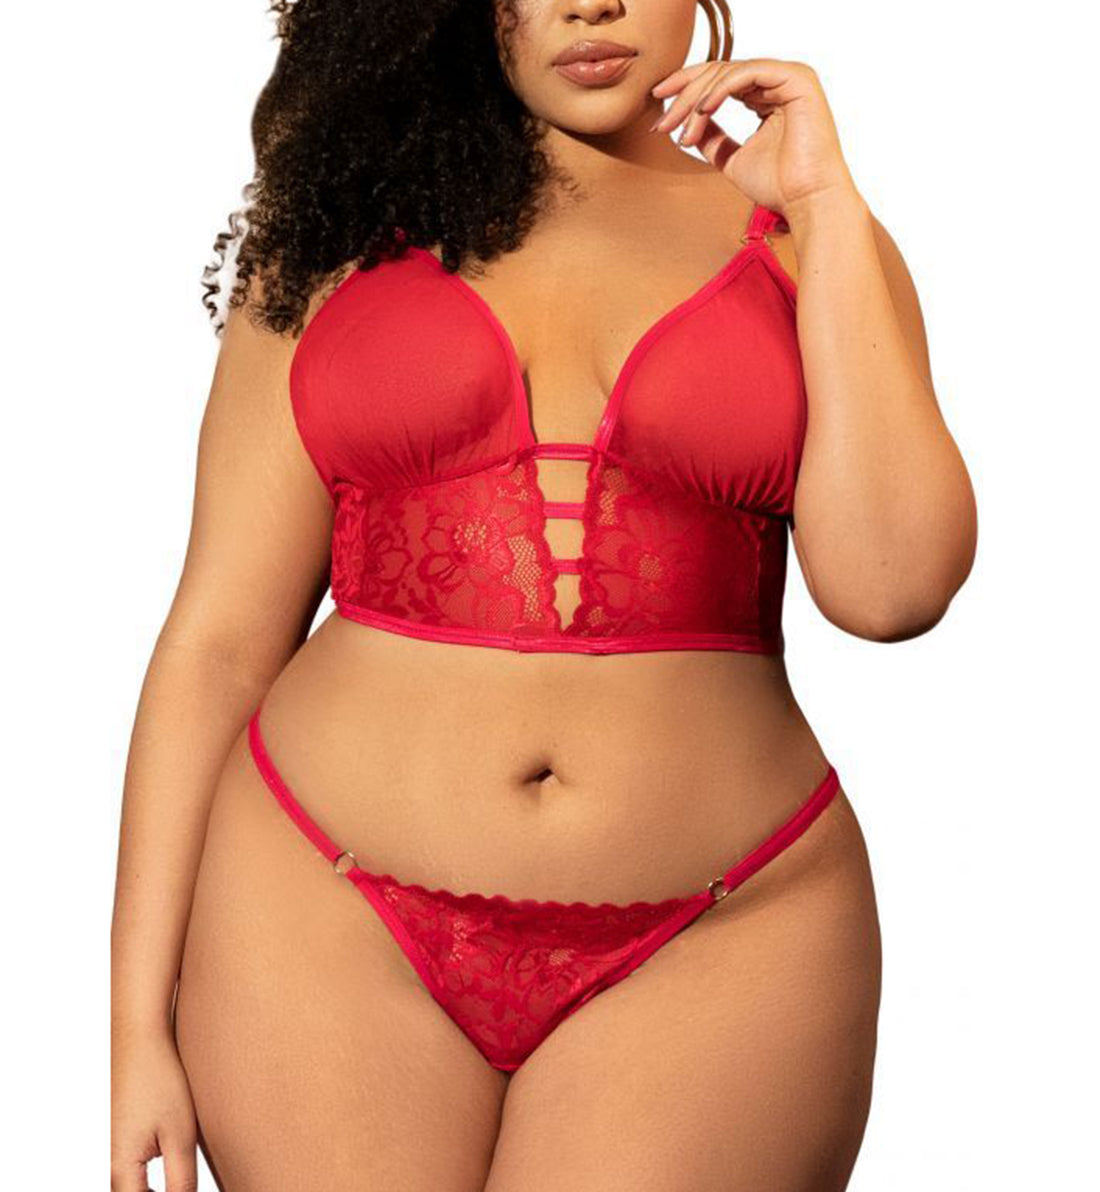 Mapale 2-in-1 Set PLUS: Longline Bralette, Removable Babydoll Skirt, Thong (7386X),1X/2X,Red - Red,1X/2X